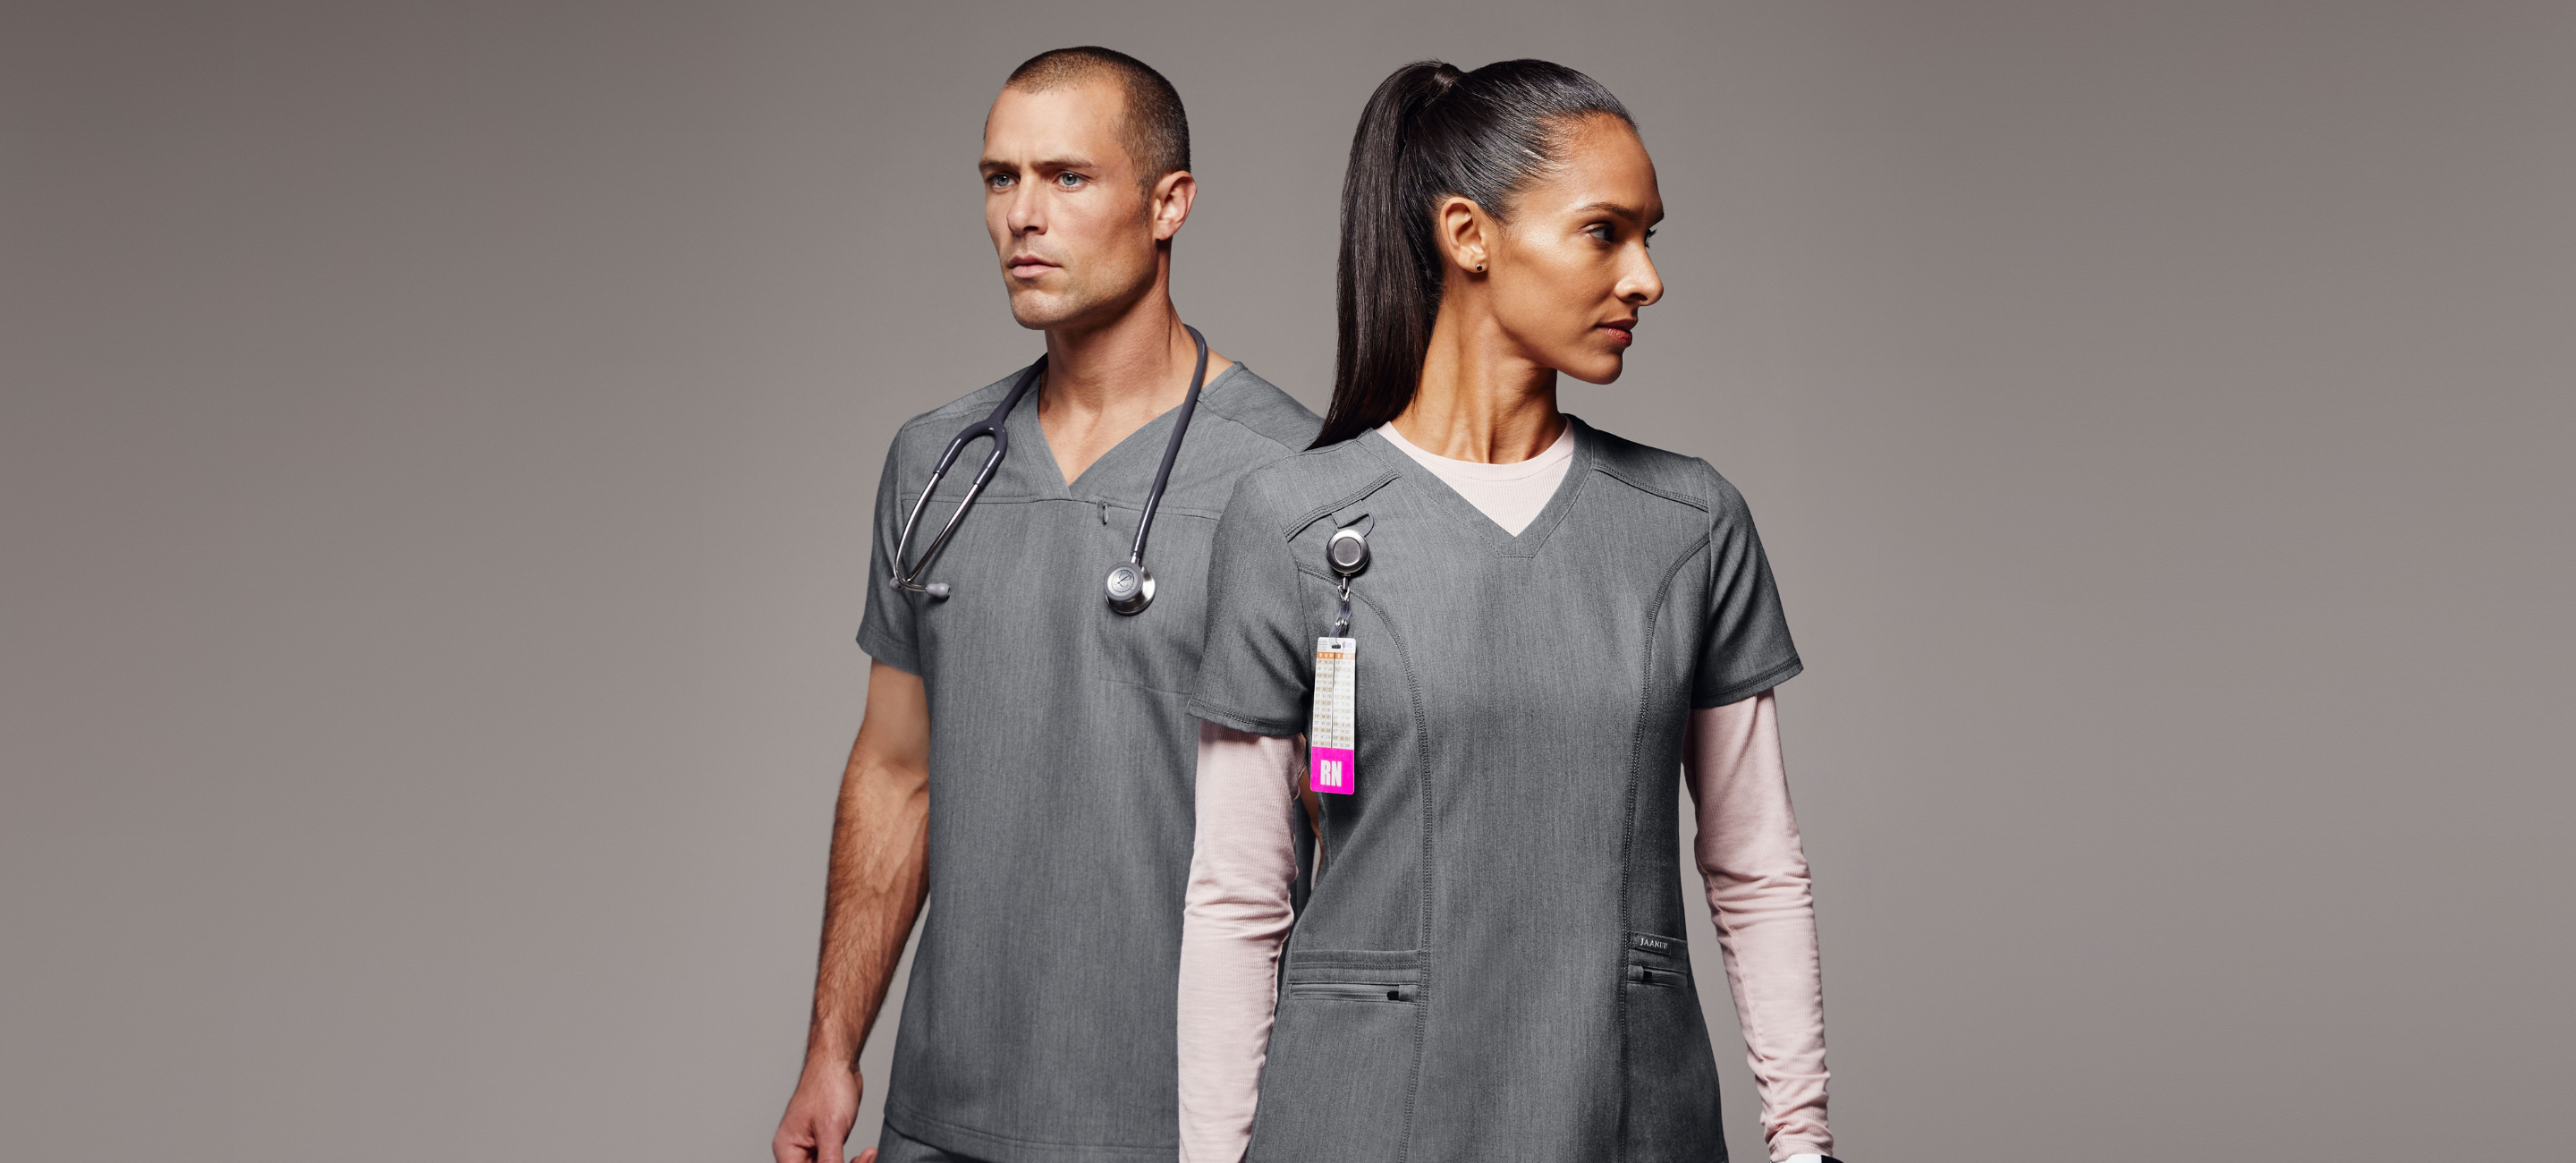 Our Best Undershirts For Scrubs & Tips On How To Wear in Style